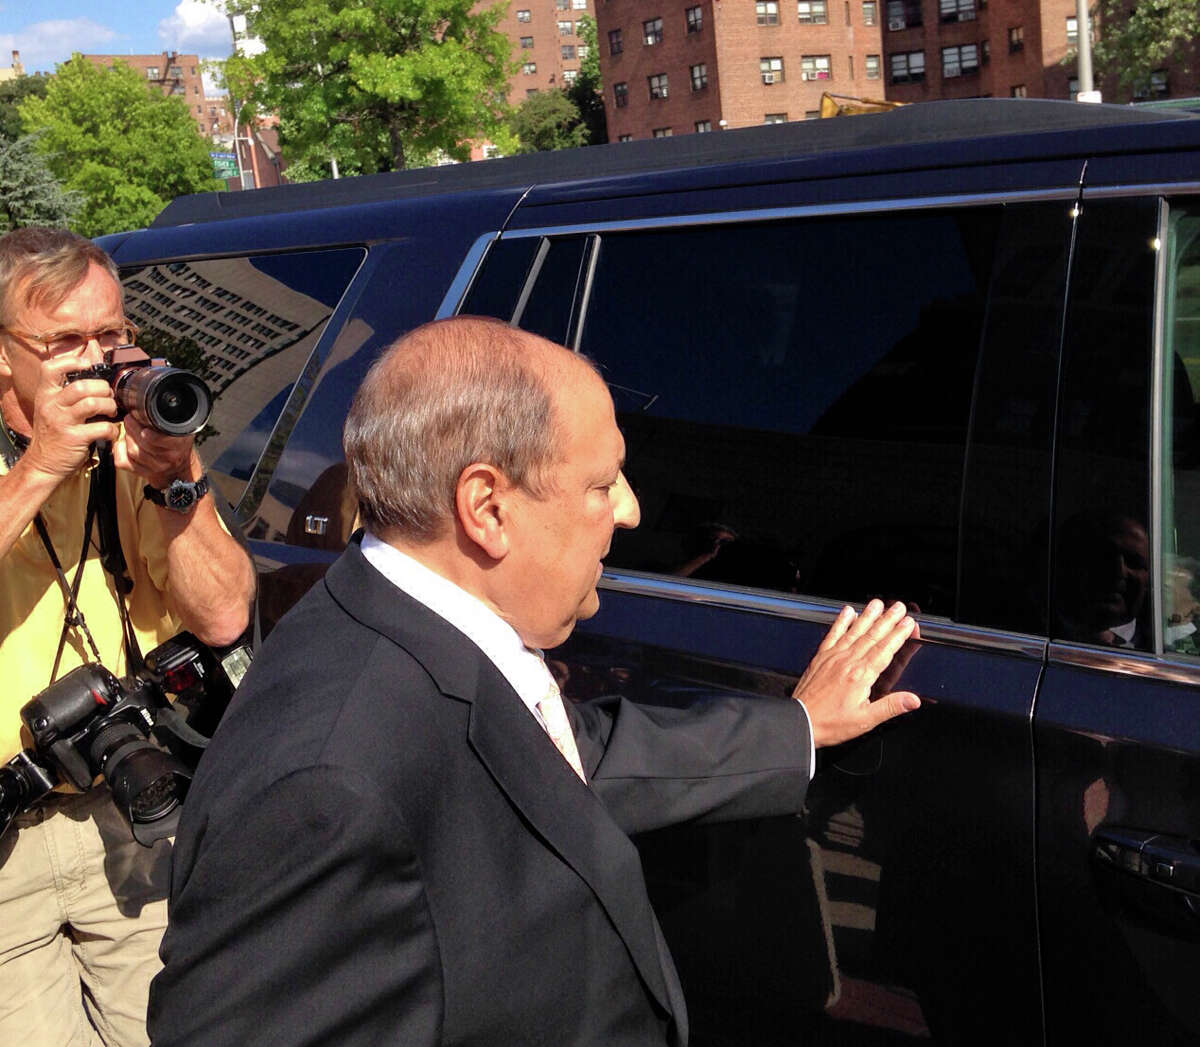 New York State Sen. Thomas Libous, R-Binghamton, leaves federal court in White Plains, N.Y., Wednesday, July 22, 2015. The New York State Senate's deputy majority leader, Libous was found guilty of lying to the FBI about arranging a high-paying job for his son. Under state law, the felony conviction means Thomas Libous loses his seat. (AP Photo/Jim Fitzgerald) ORG XMIT: NYR106